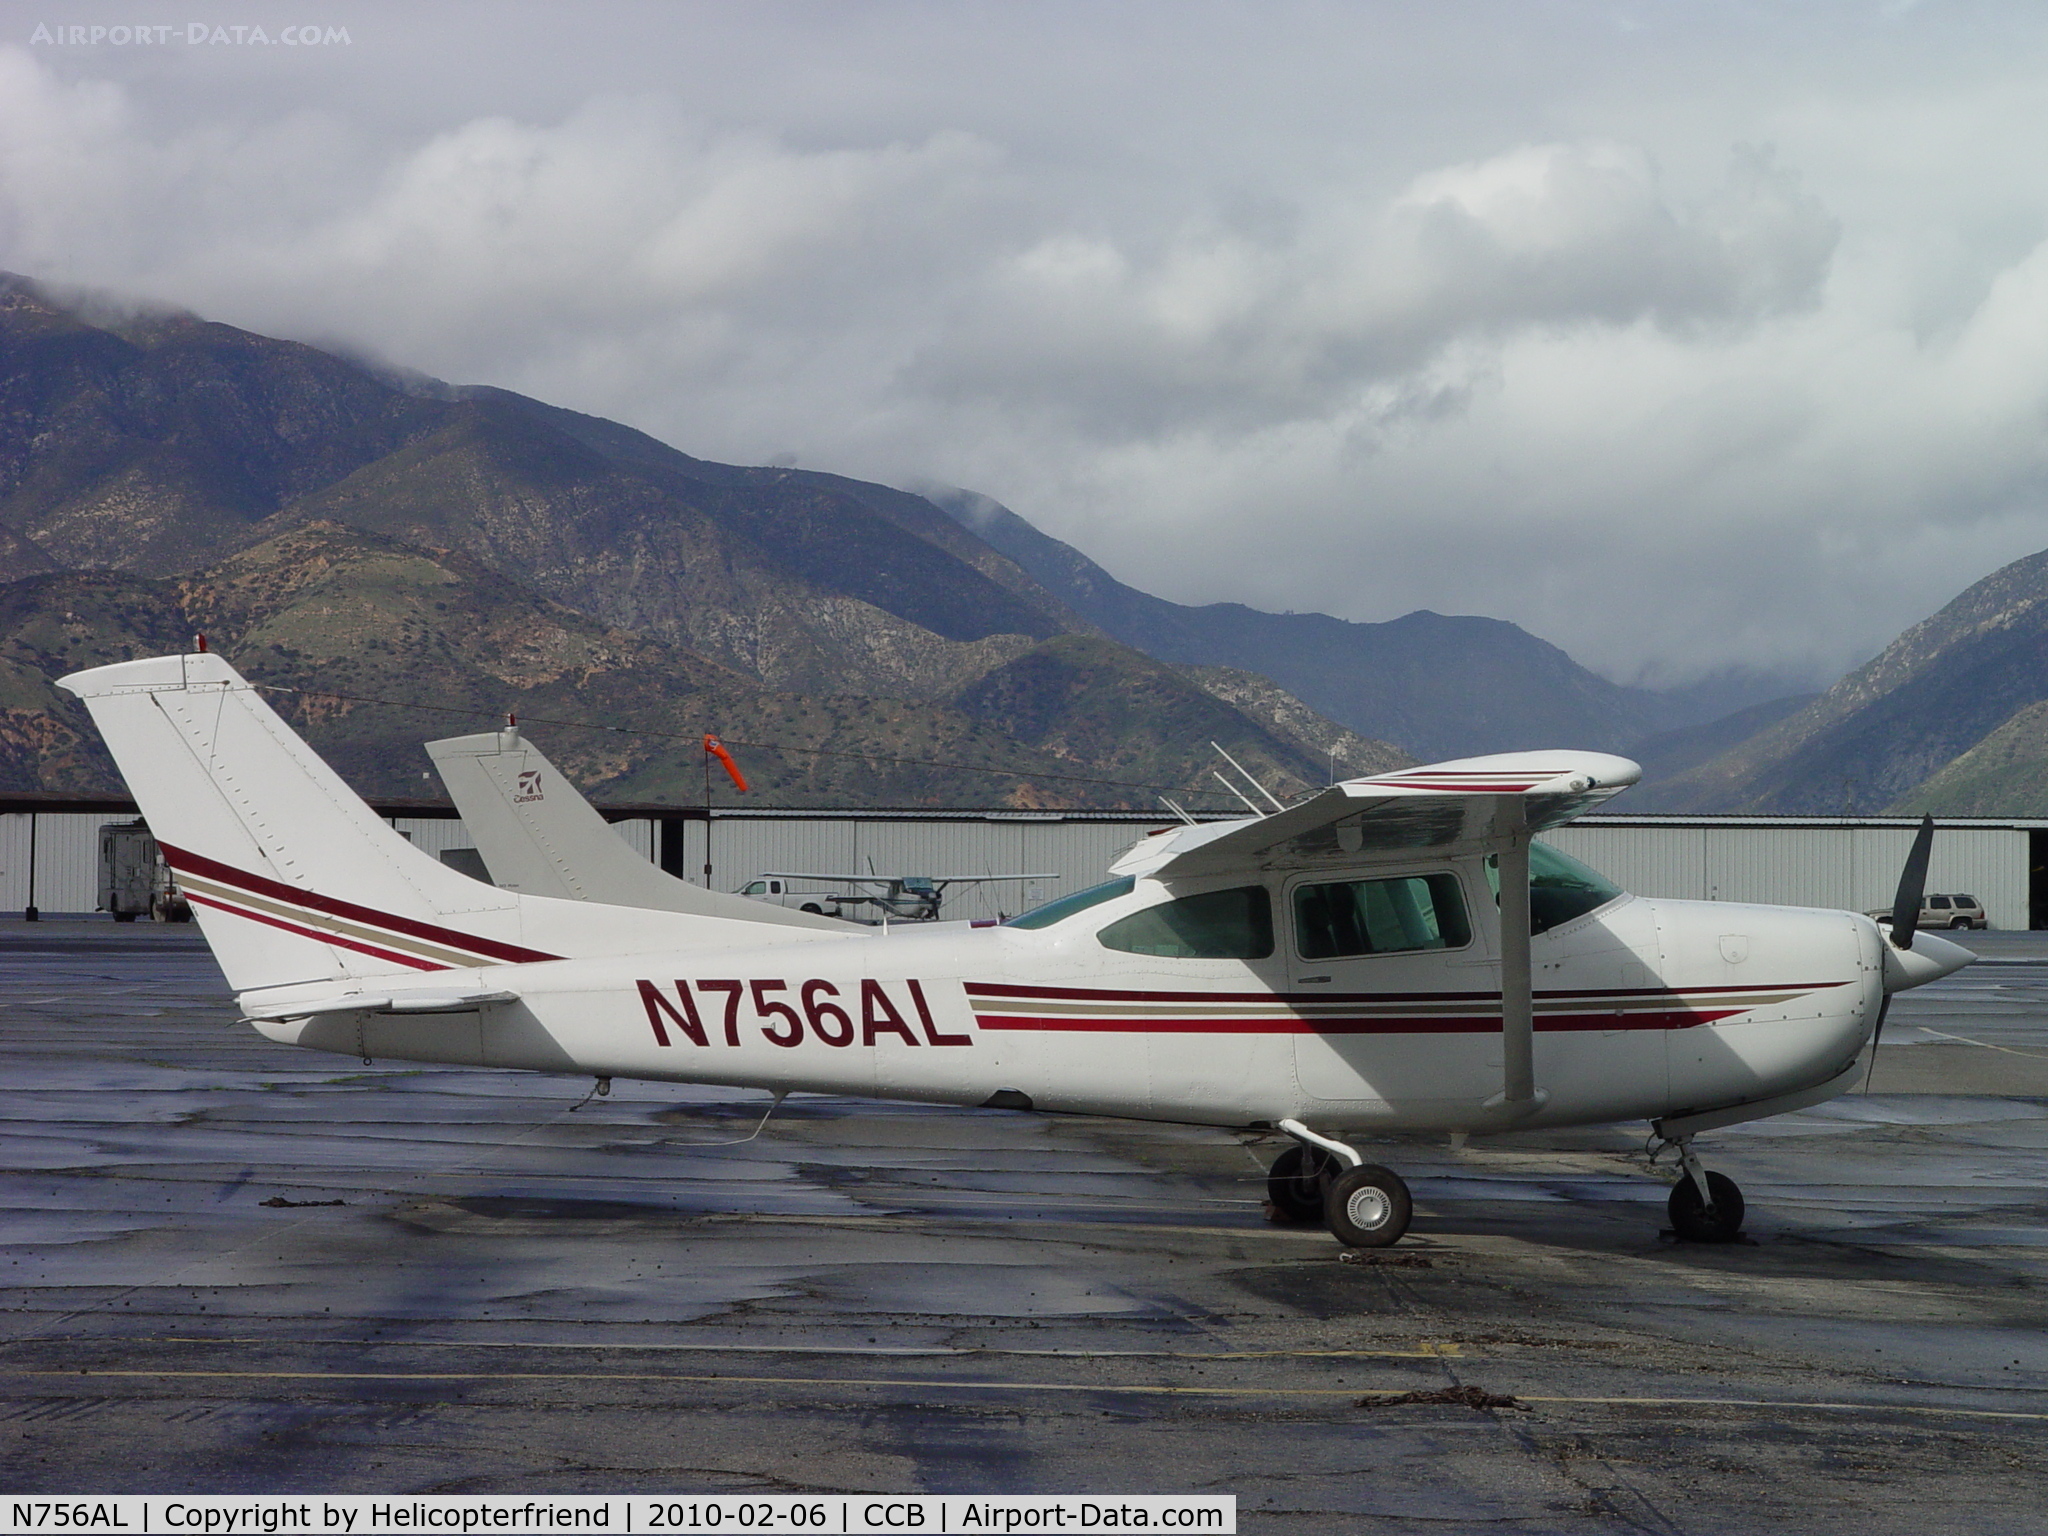 N756AL, 1979 Cessna TR182 Turbo Skylane RG C/N R18201023, Parked at Cable during the lull in rain